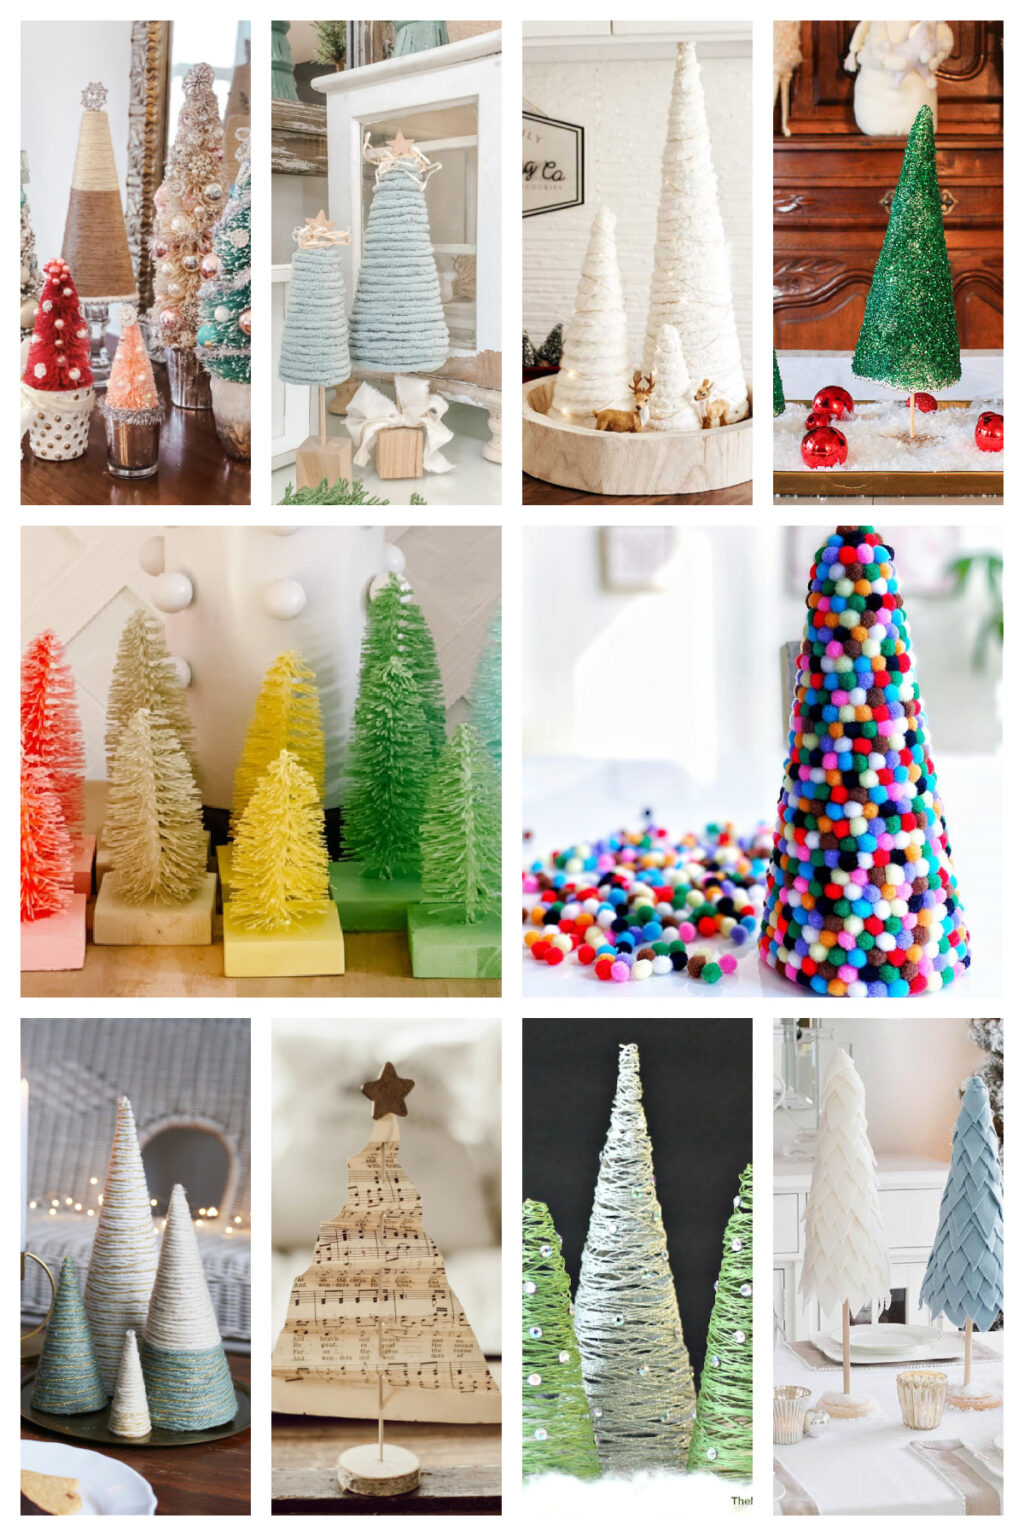 15 Fabulous DIY Christmas Projects - Bluesky at Home